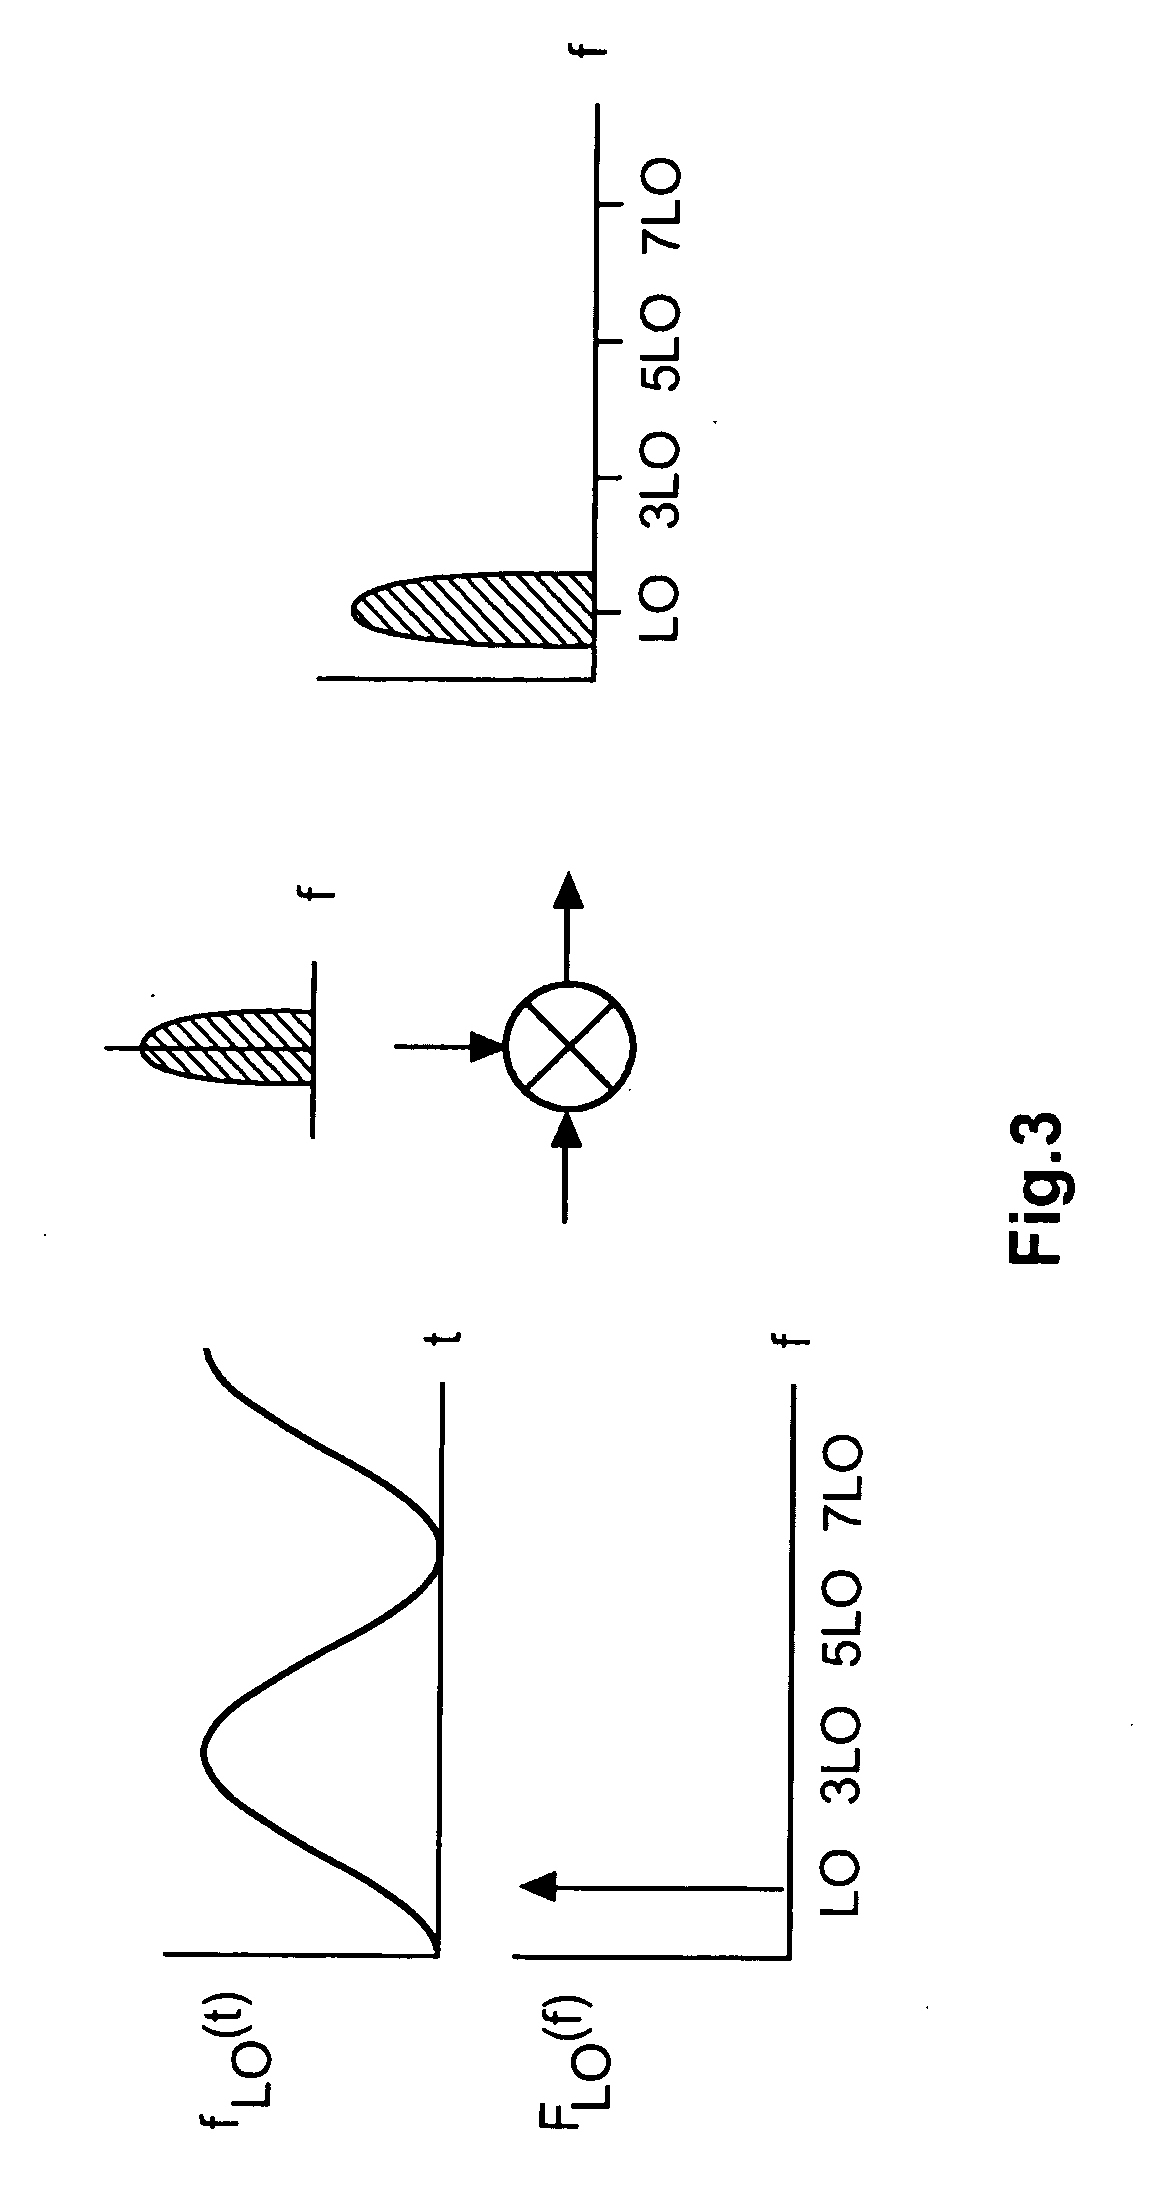 Harmonic rejection mixer unit and method for performing a harmonic rejection mixing